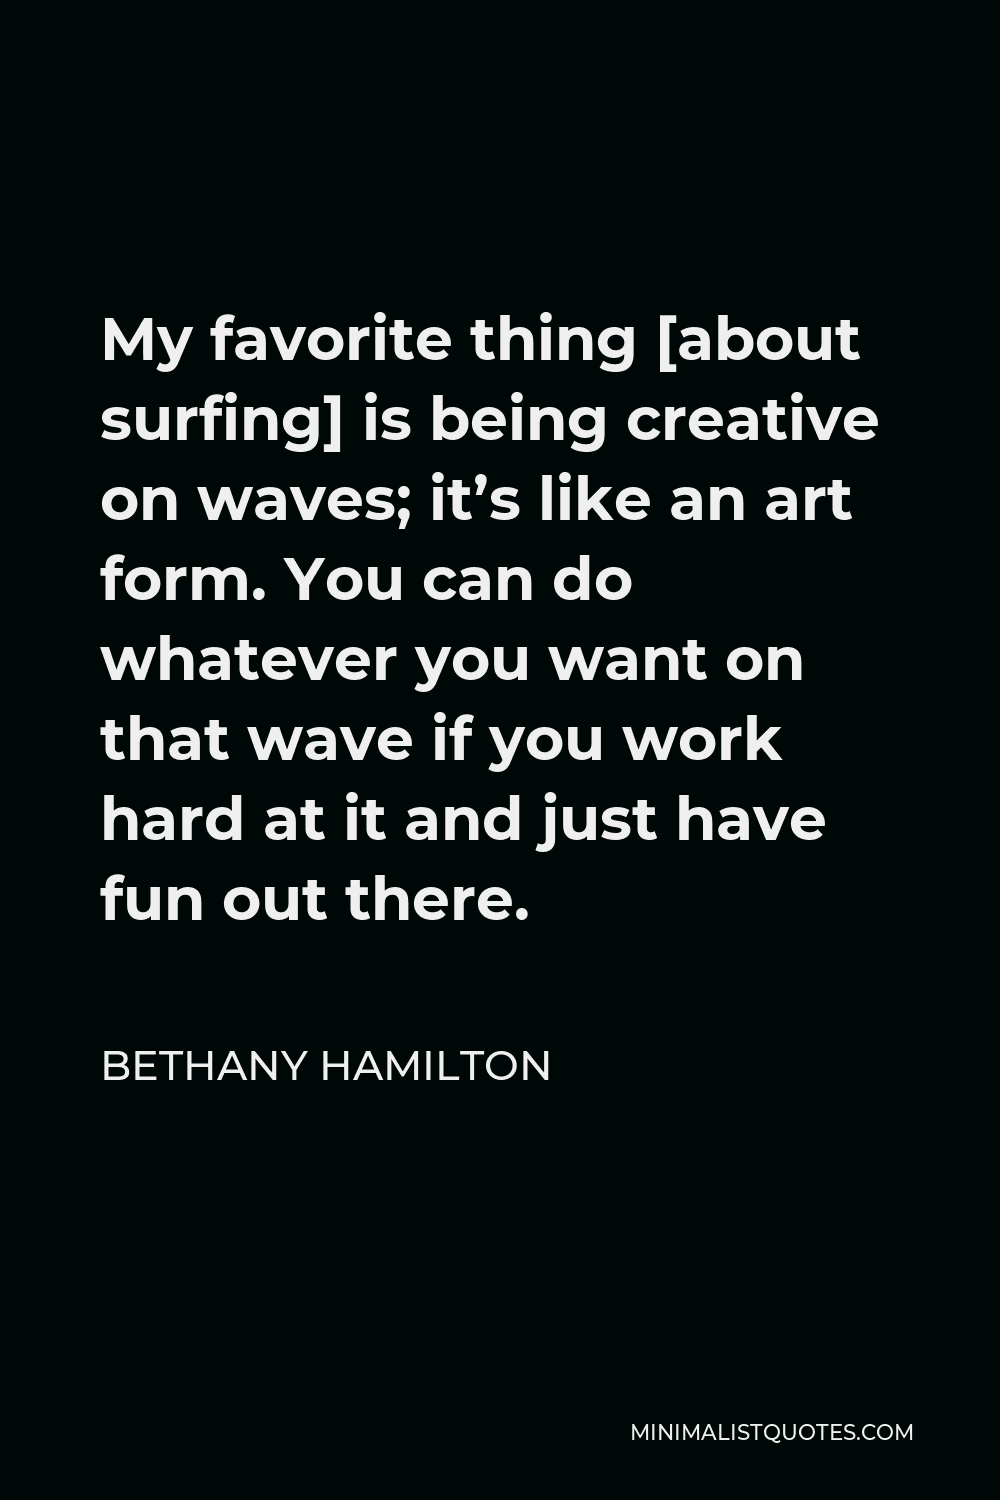 Bethany Hamilton Quote - My favorite thing [about surfing] is being creative on waves; it’s like an art form. You can do whatever you want on that wave if you work hard at it and just have fun out there.